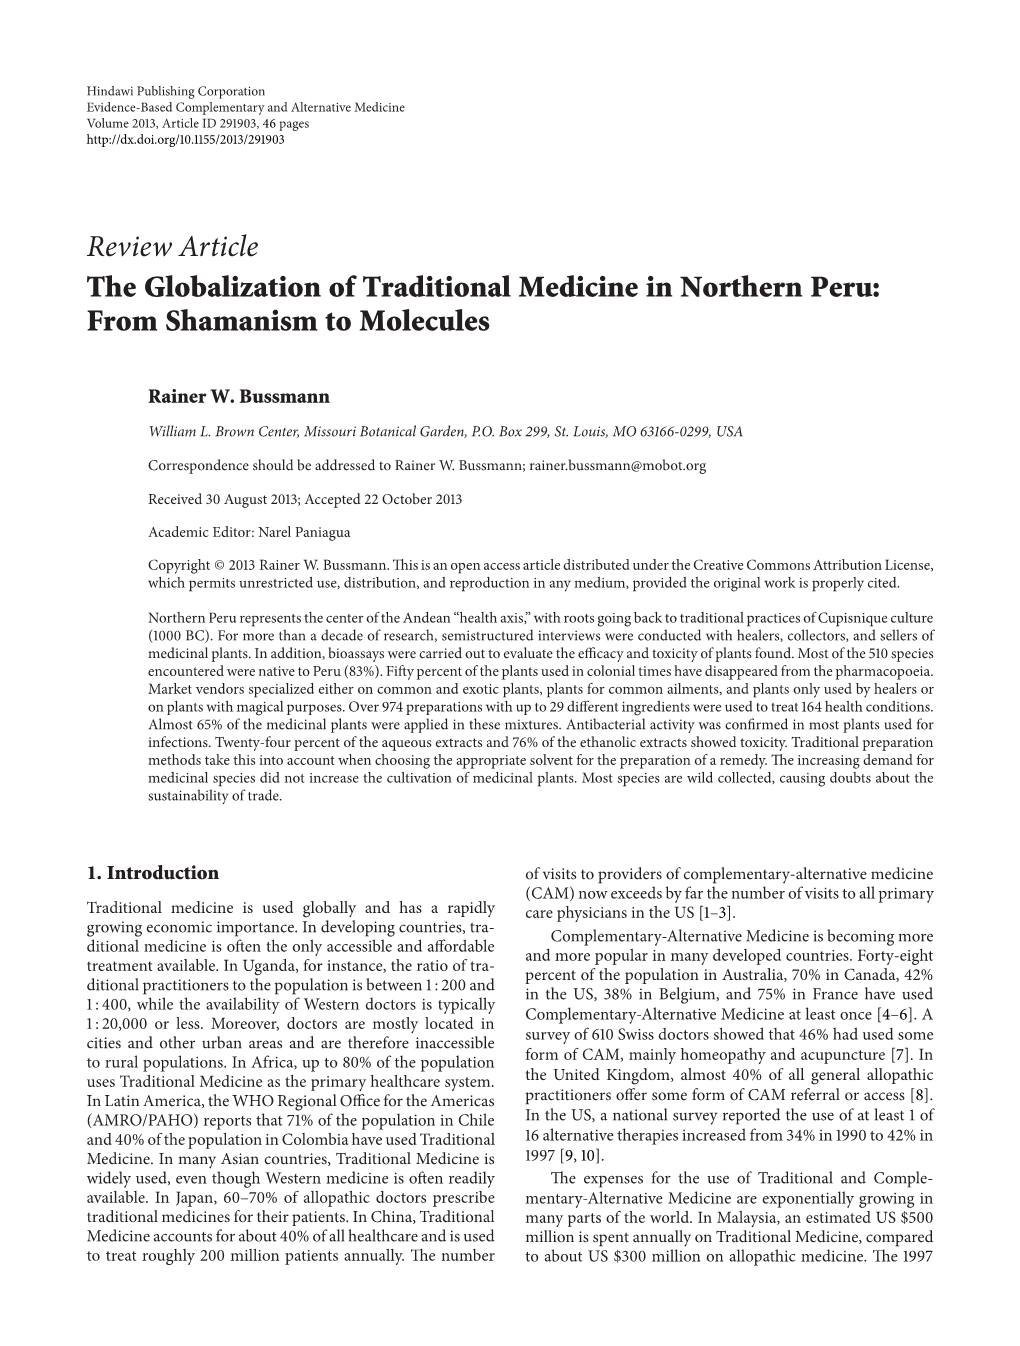 The Globalization of Traditional Medicine in Northern Peru: from Shamanism to Molecules